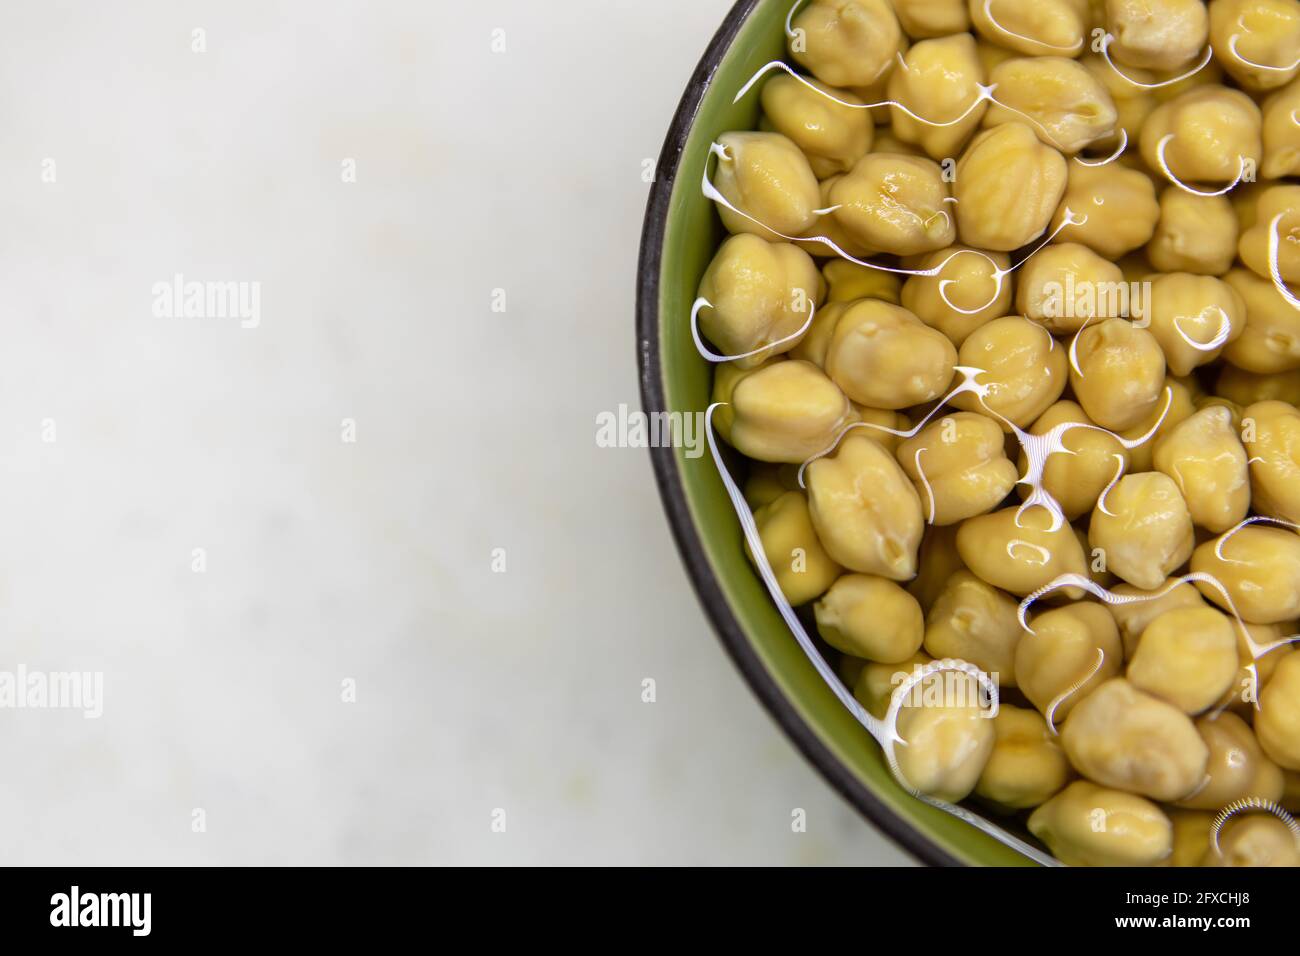 Chickpeas soaked in water, in bowl, on marble table. Concept of healthy eating, veganism, vegetarianism, meat and egg replacement. Prepare chickpeas b Stock Photo